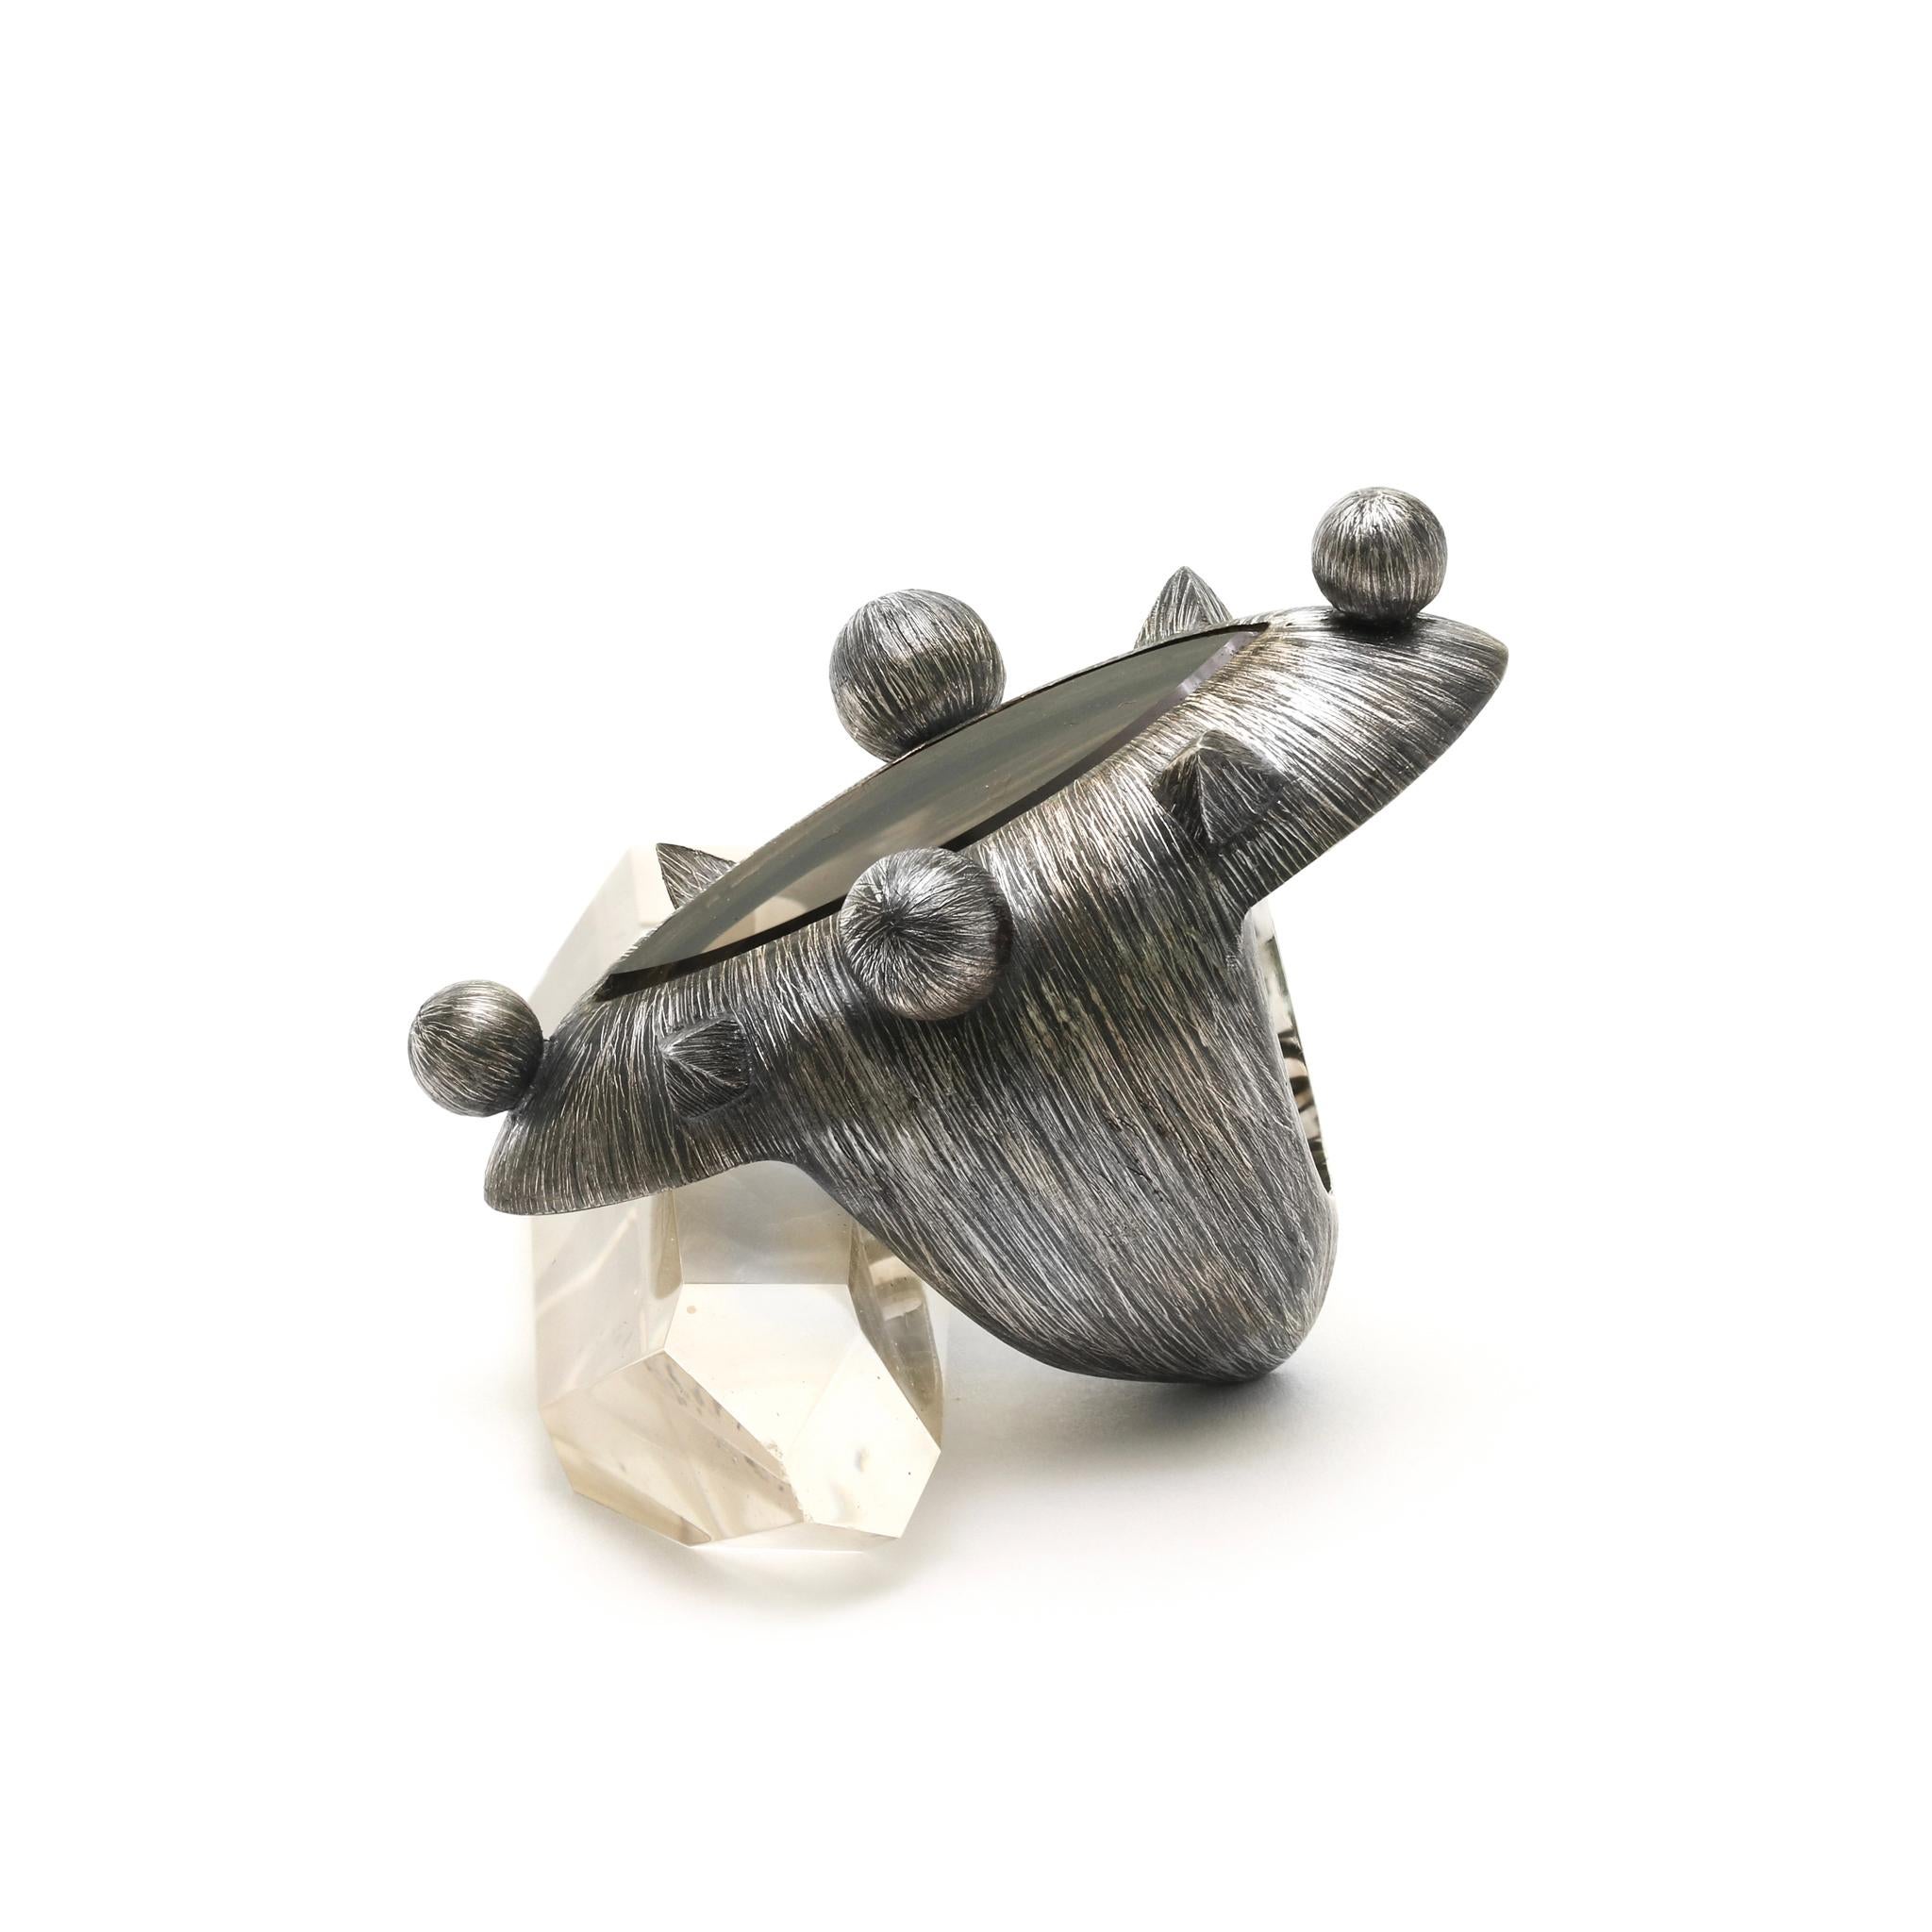 Balinese Constellation Ring, Etched Sterling Silver & Smoky Quartz